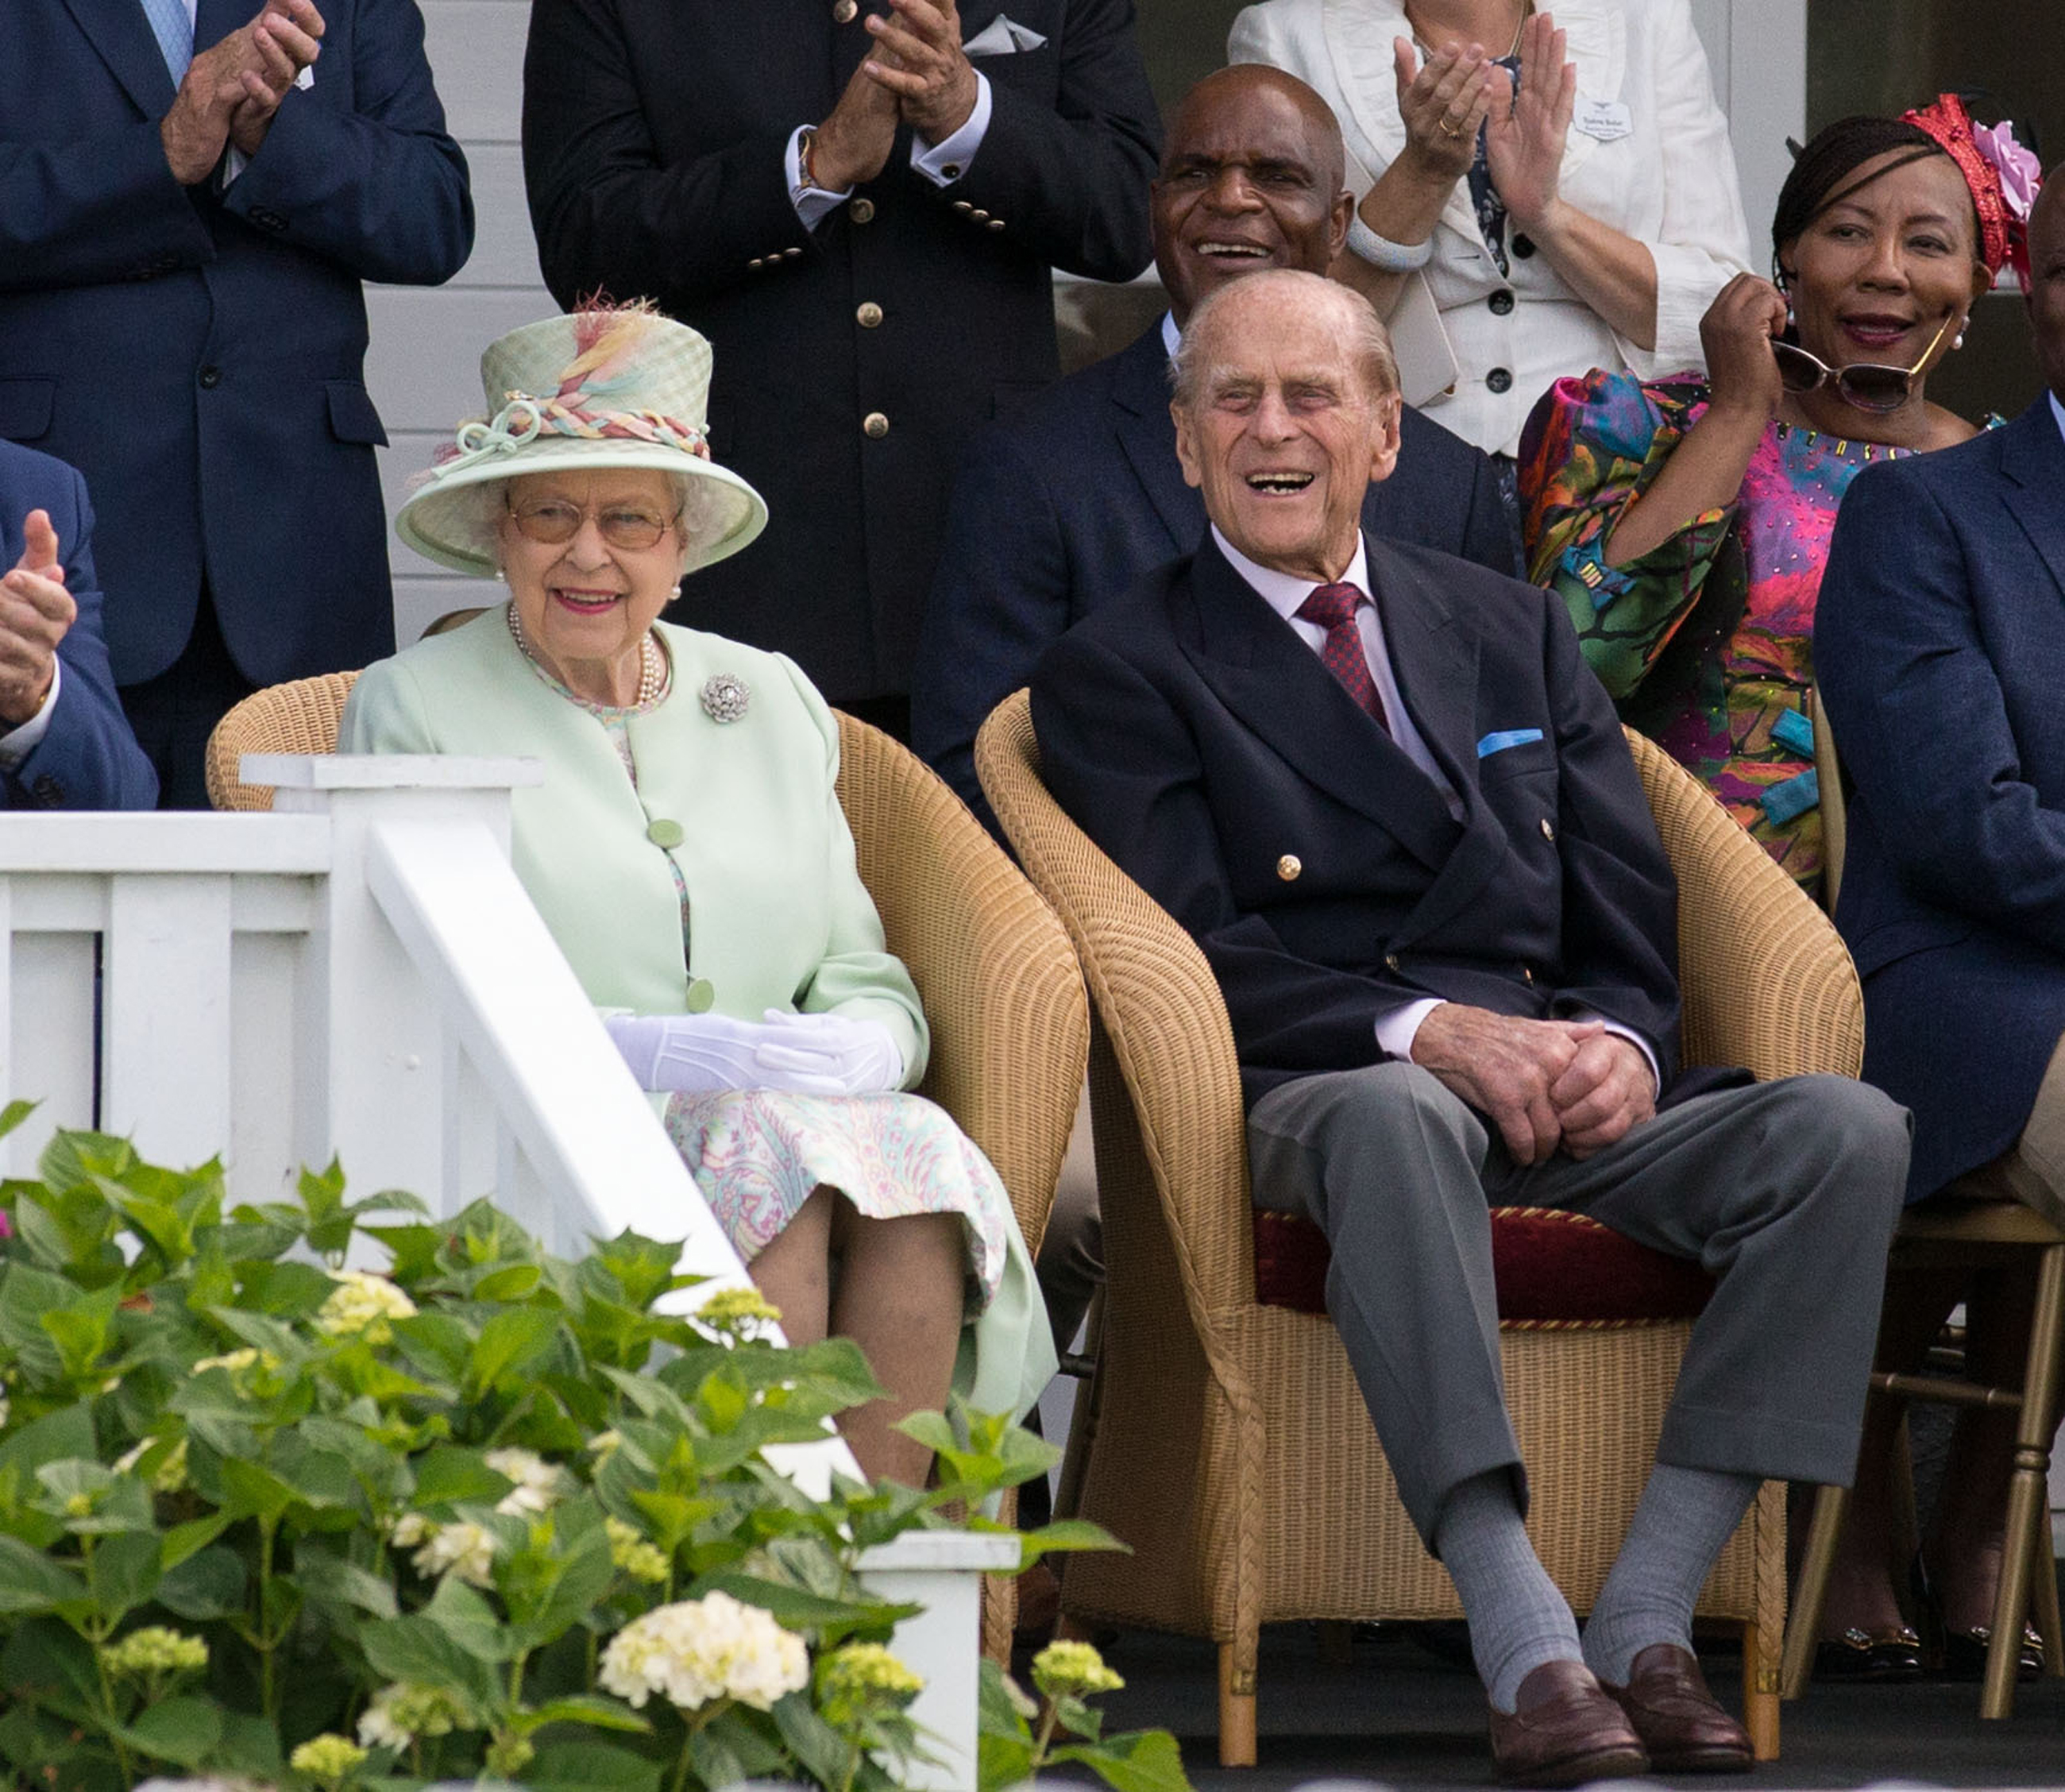 The Queen and the Duke of Edinburgh watch a British Driving Society parade